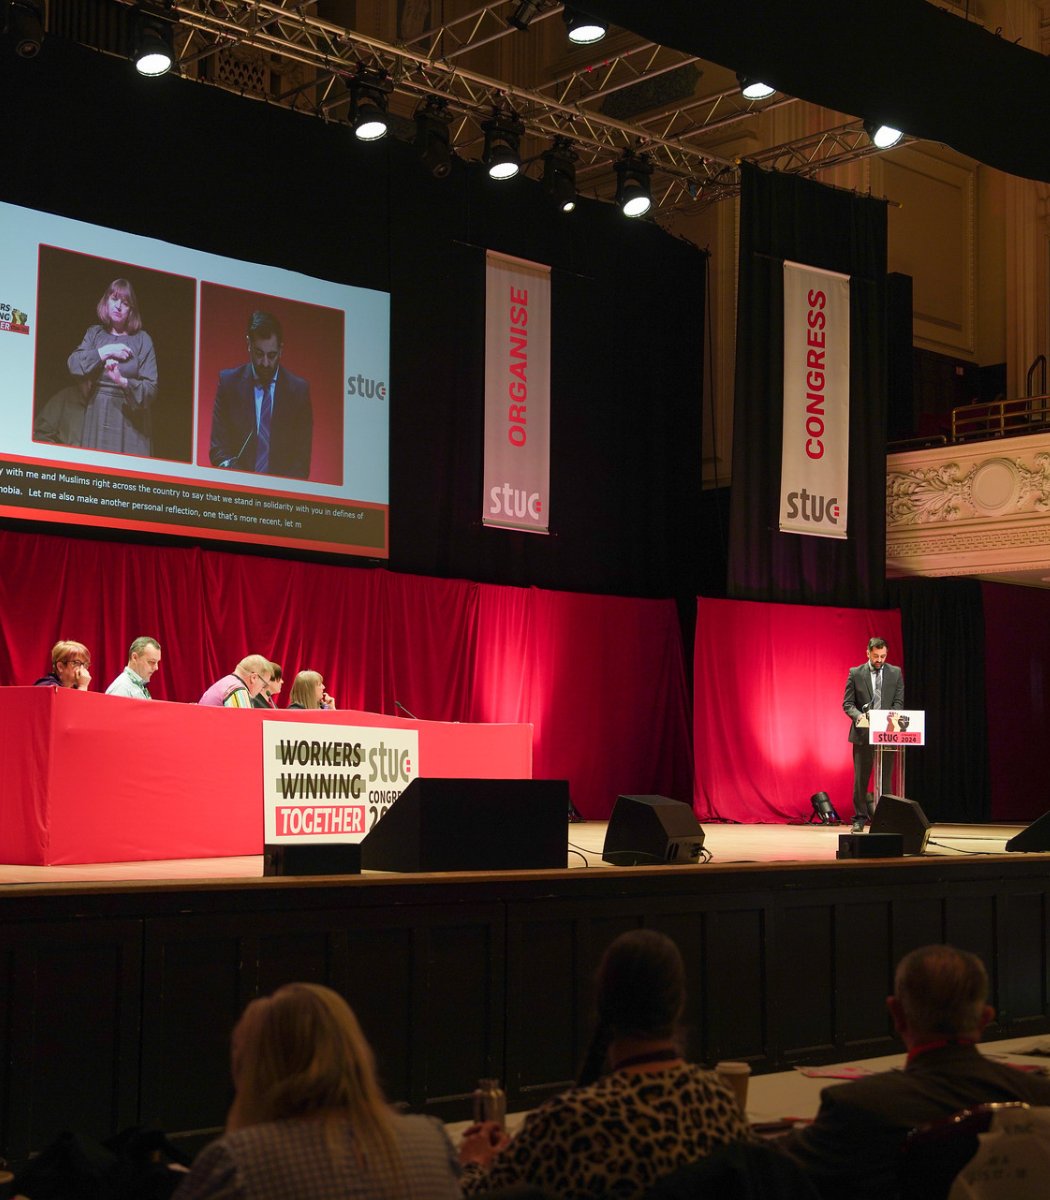 At #STUC24, First Minister @HumzaYousaf spoke about the important role of trade unions in driving @ScotGov's Fair Work policy. He said he will continue to support and strengthen workers’ rights, and is proud to be delivering progressive taxation - a direct ask of @ScottishTUC.